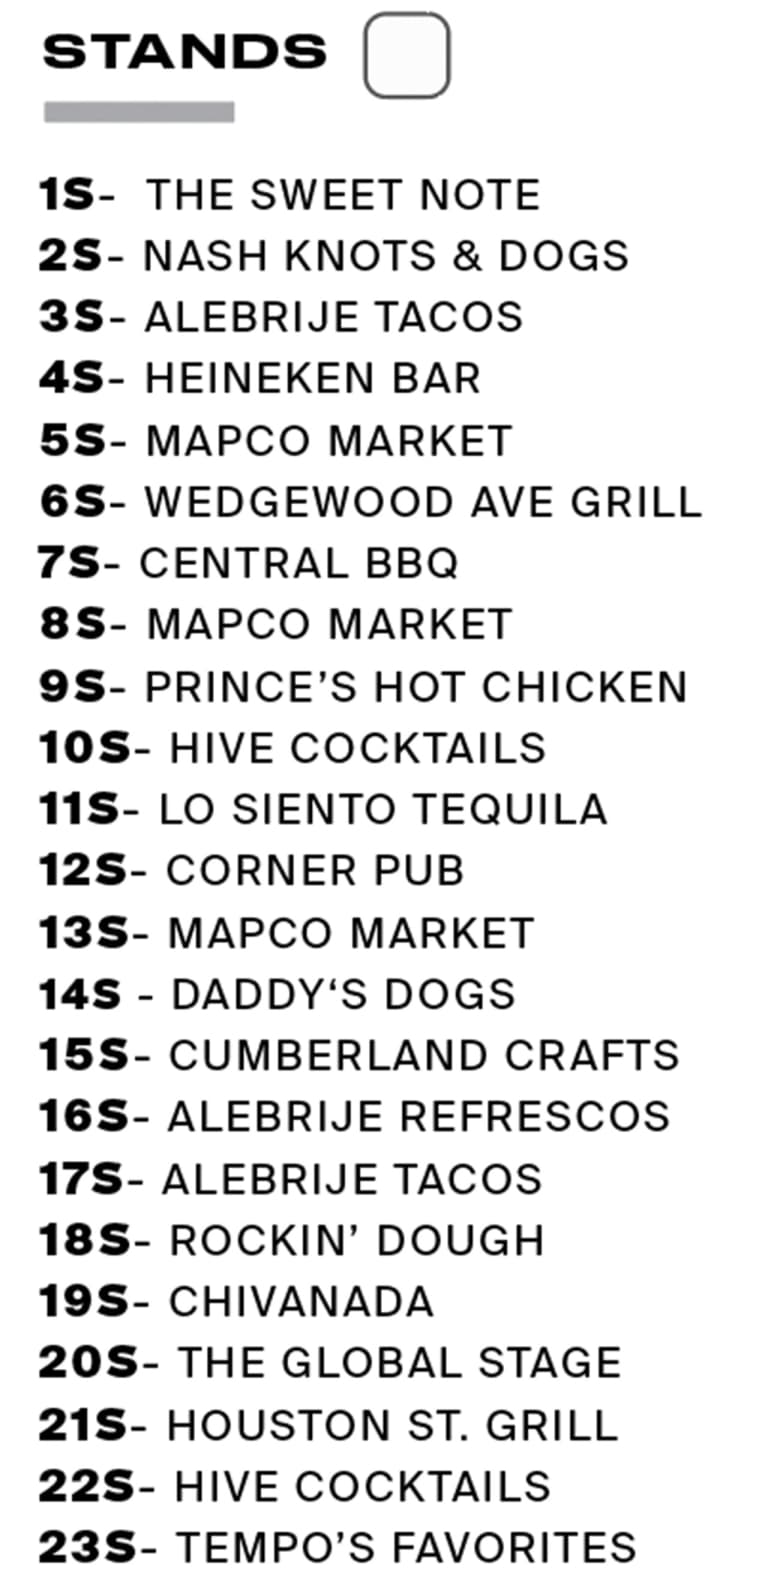 22CONCESSIONS-STANDS